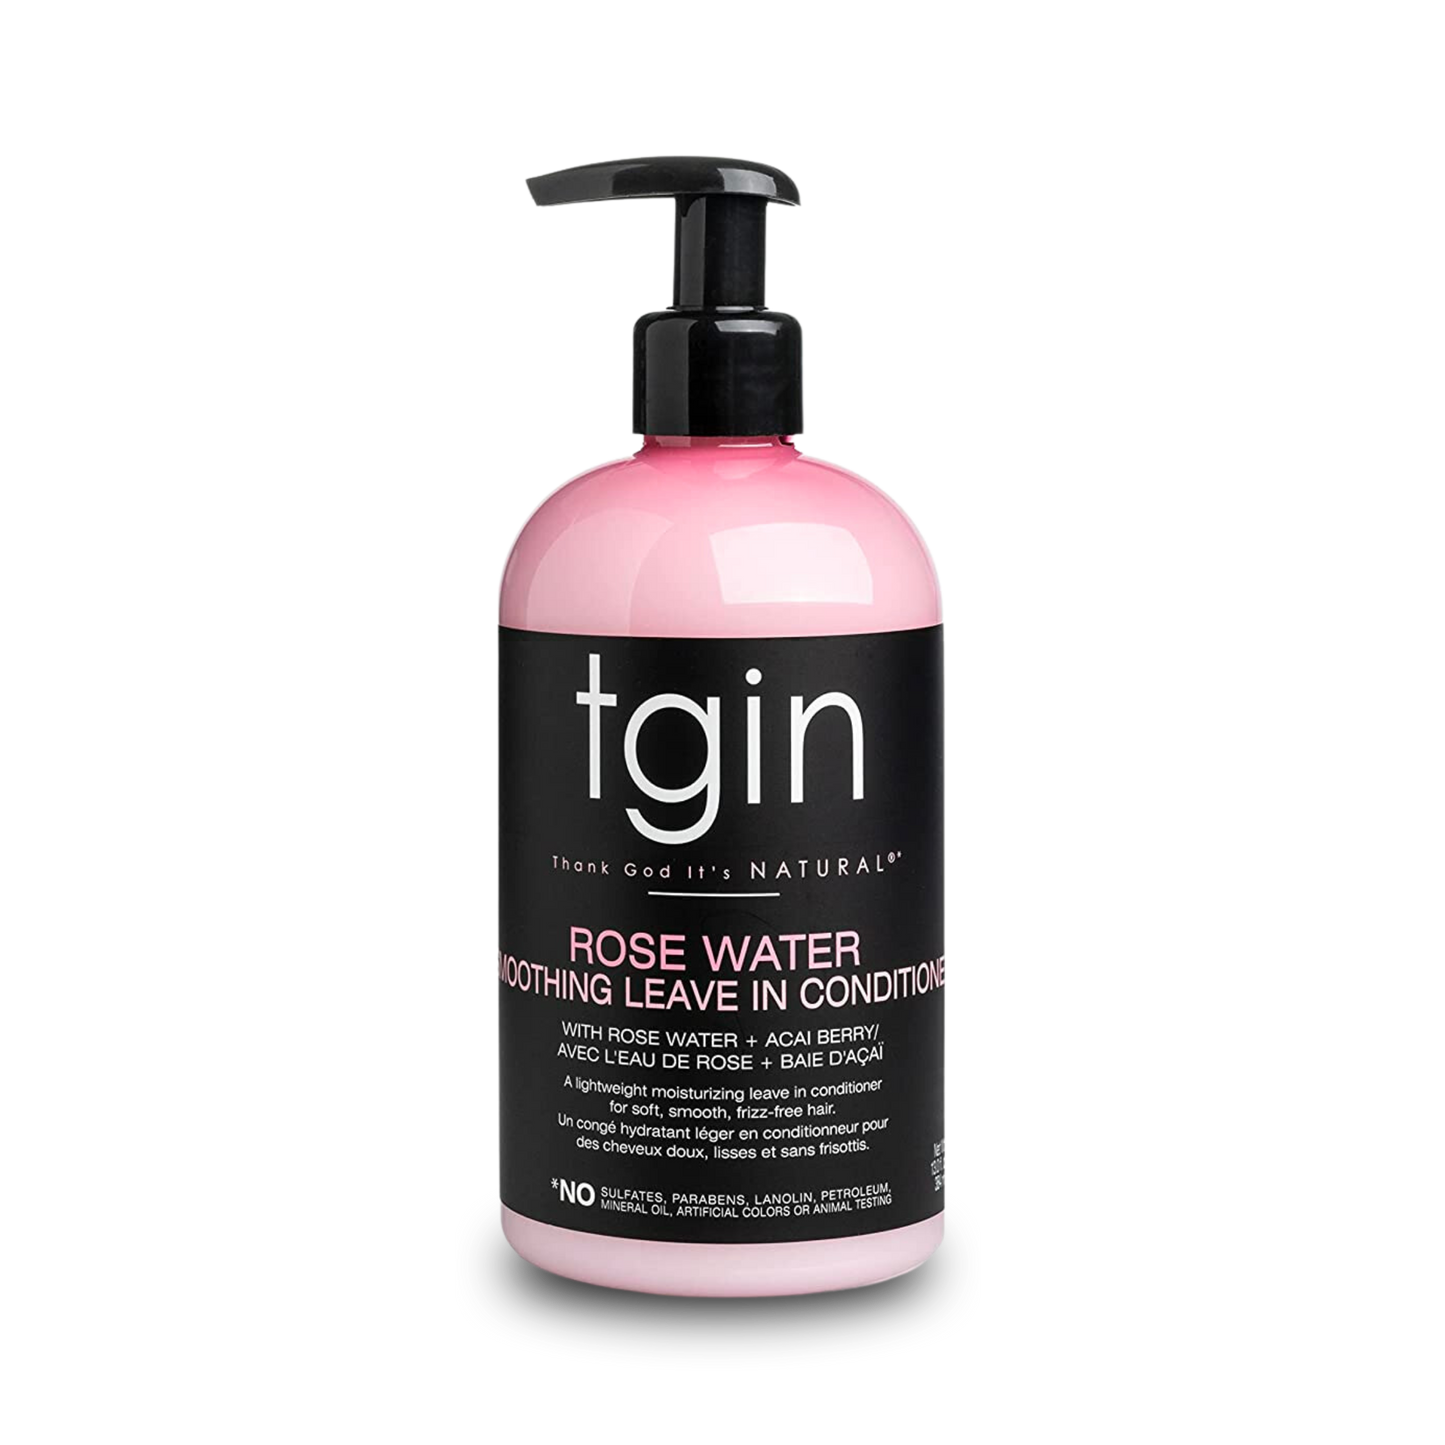 Rose Water Smoothing Leave In Conditioner